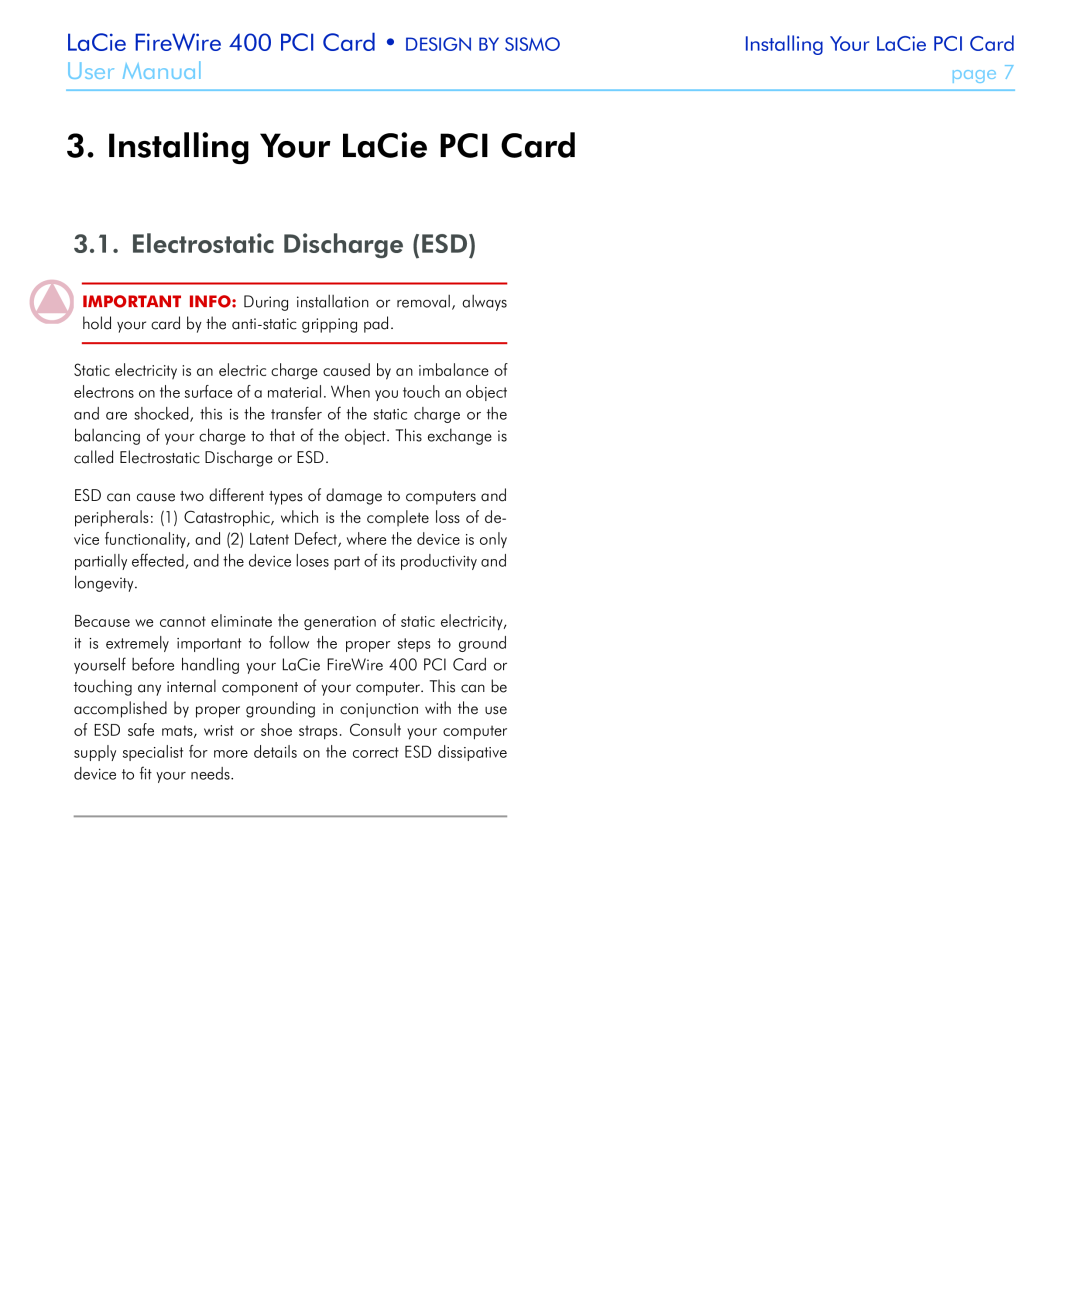 LaCie Installing Your LaCie PCI Card, Electrostatic Discharge ESD, LaCie FireWire 400 PCI Card DESIGN BY SISMO, page 